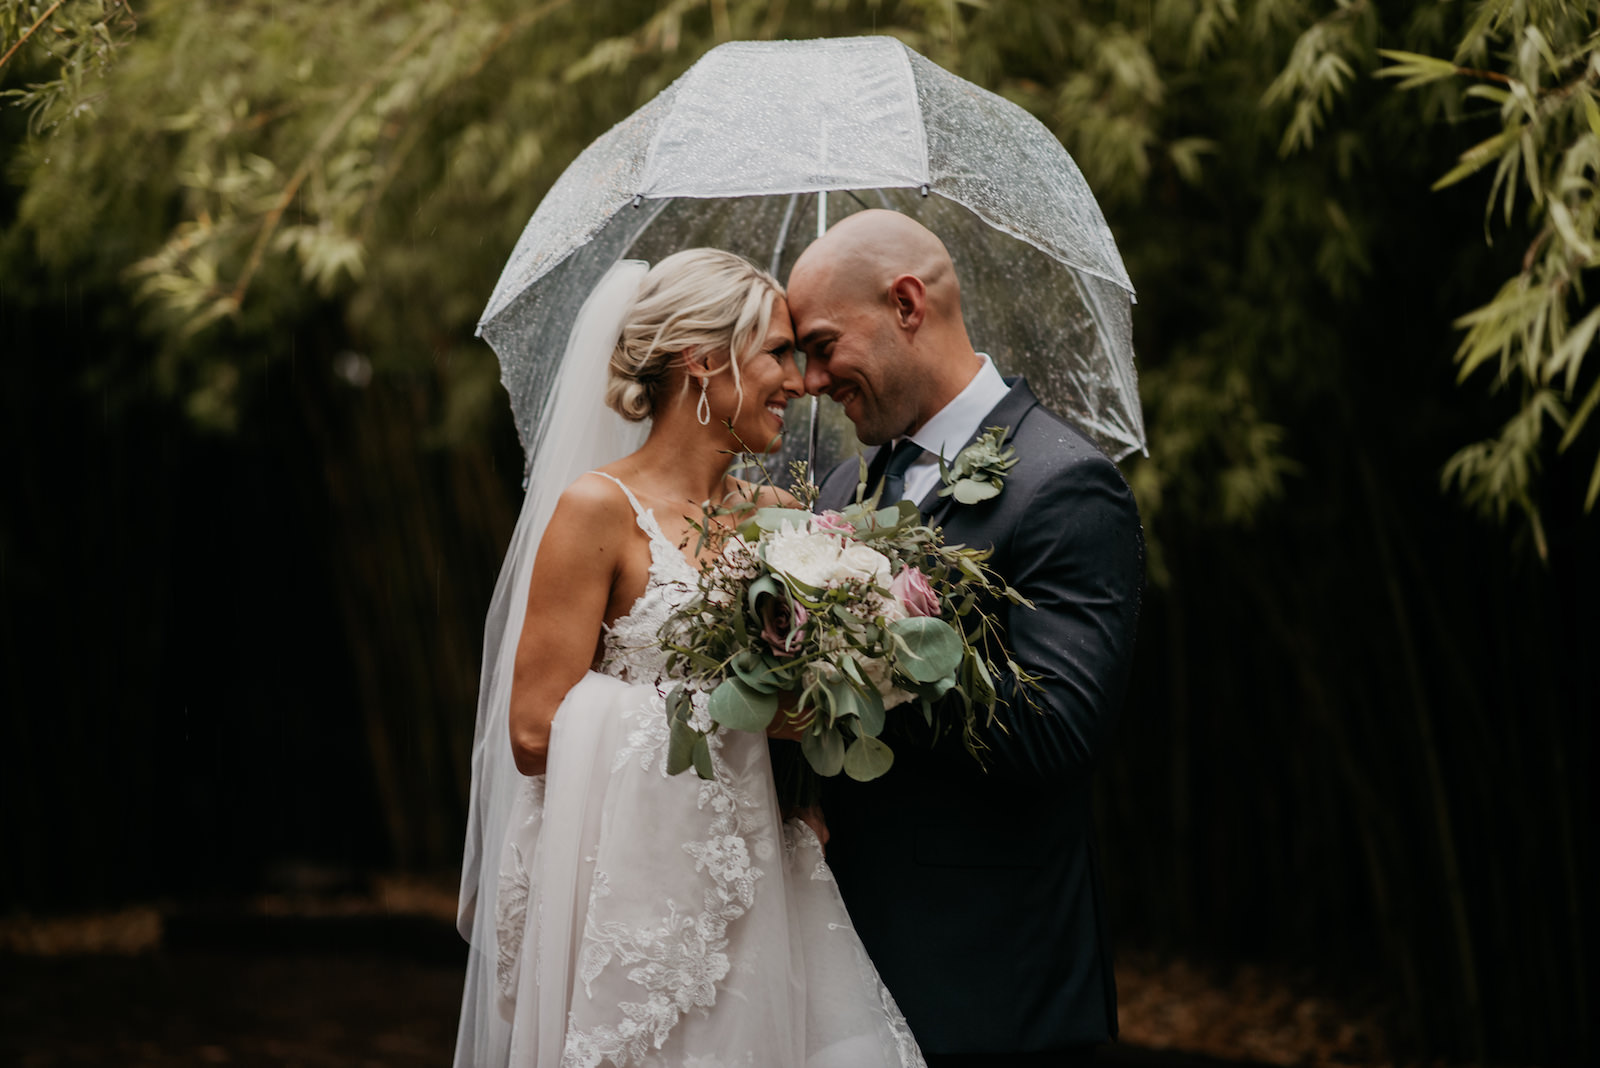 Downtown St. Pete Bride and Groom Wedding Portrait in The Rain, Holding Romantic Bridal Bouquet with White and Pink Roses, and Greenery Eucalyptus, Under Clear Umbrella | Historic Florida Wedding Venue NOVA 535